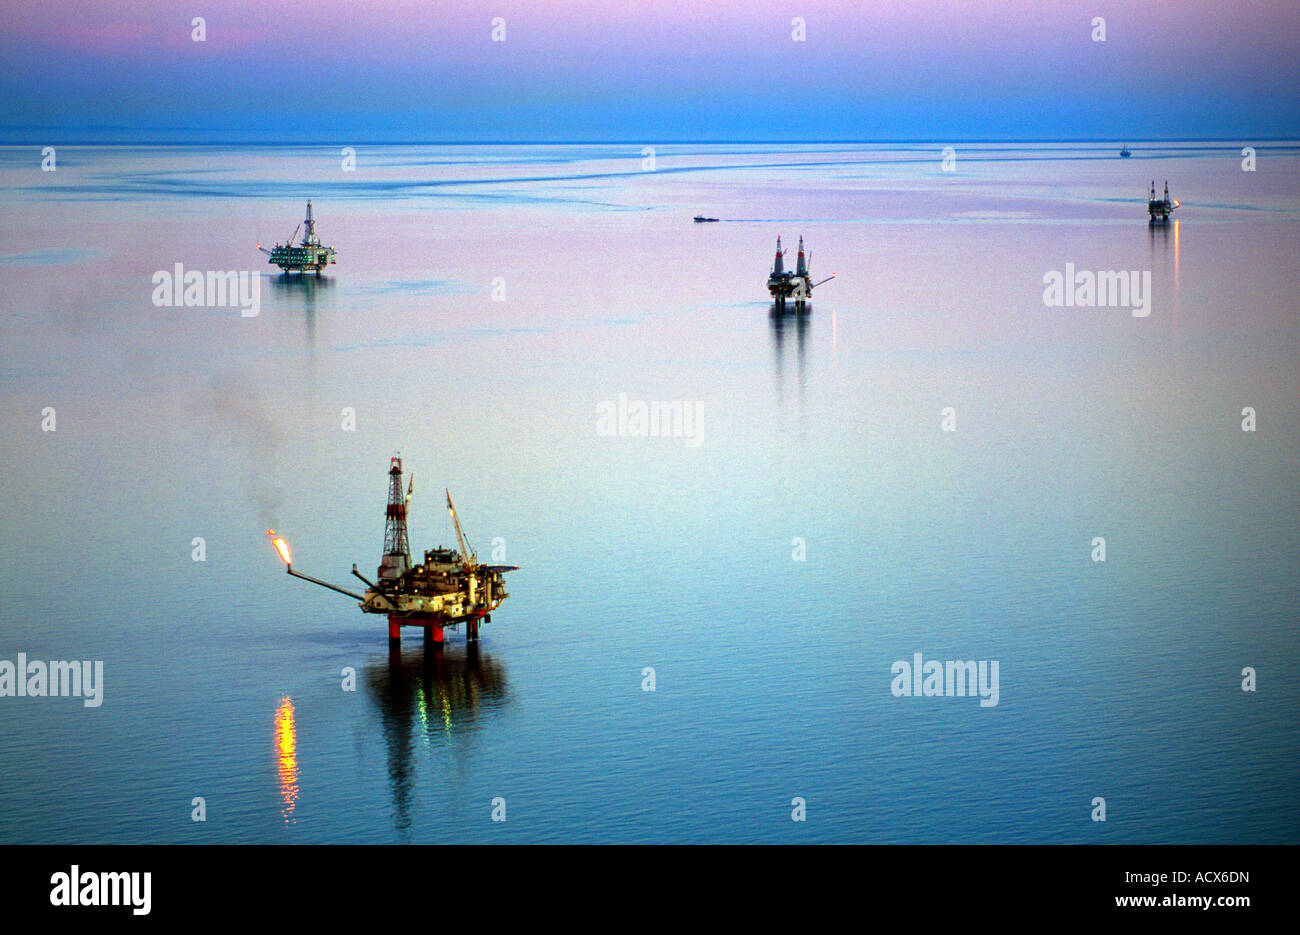 offshore-oil-and-gas-production-in-the-c